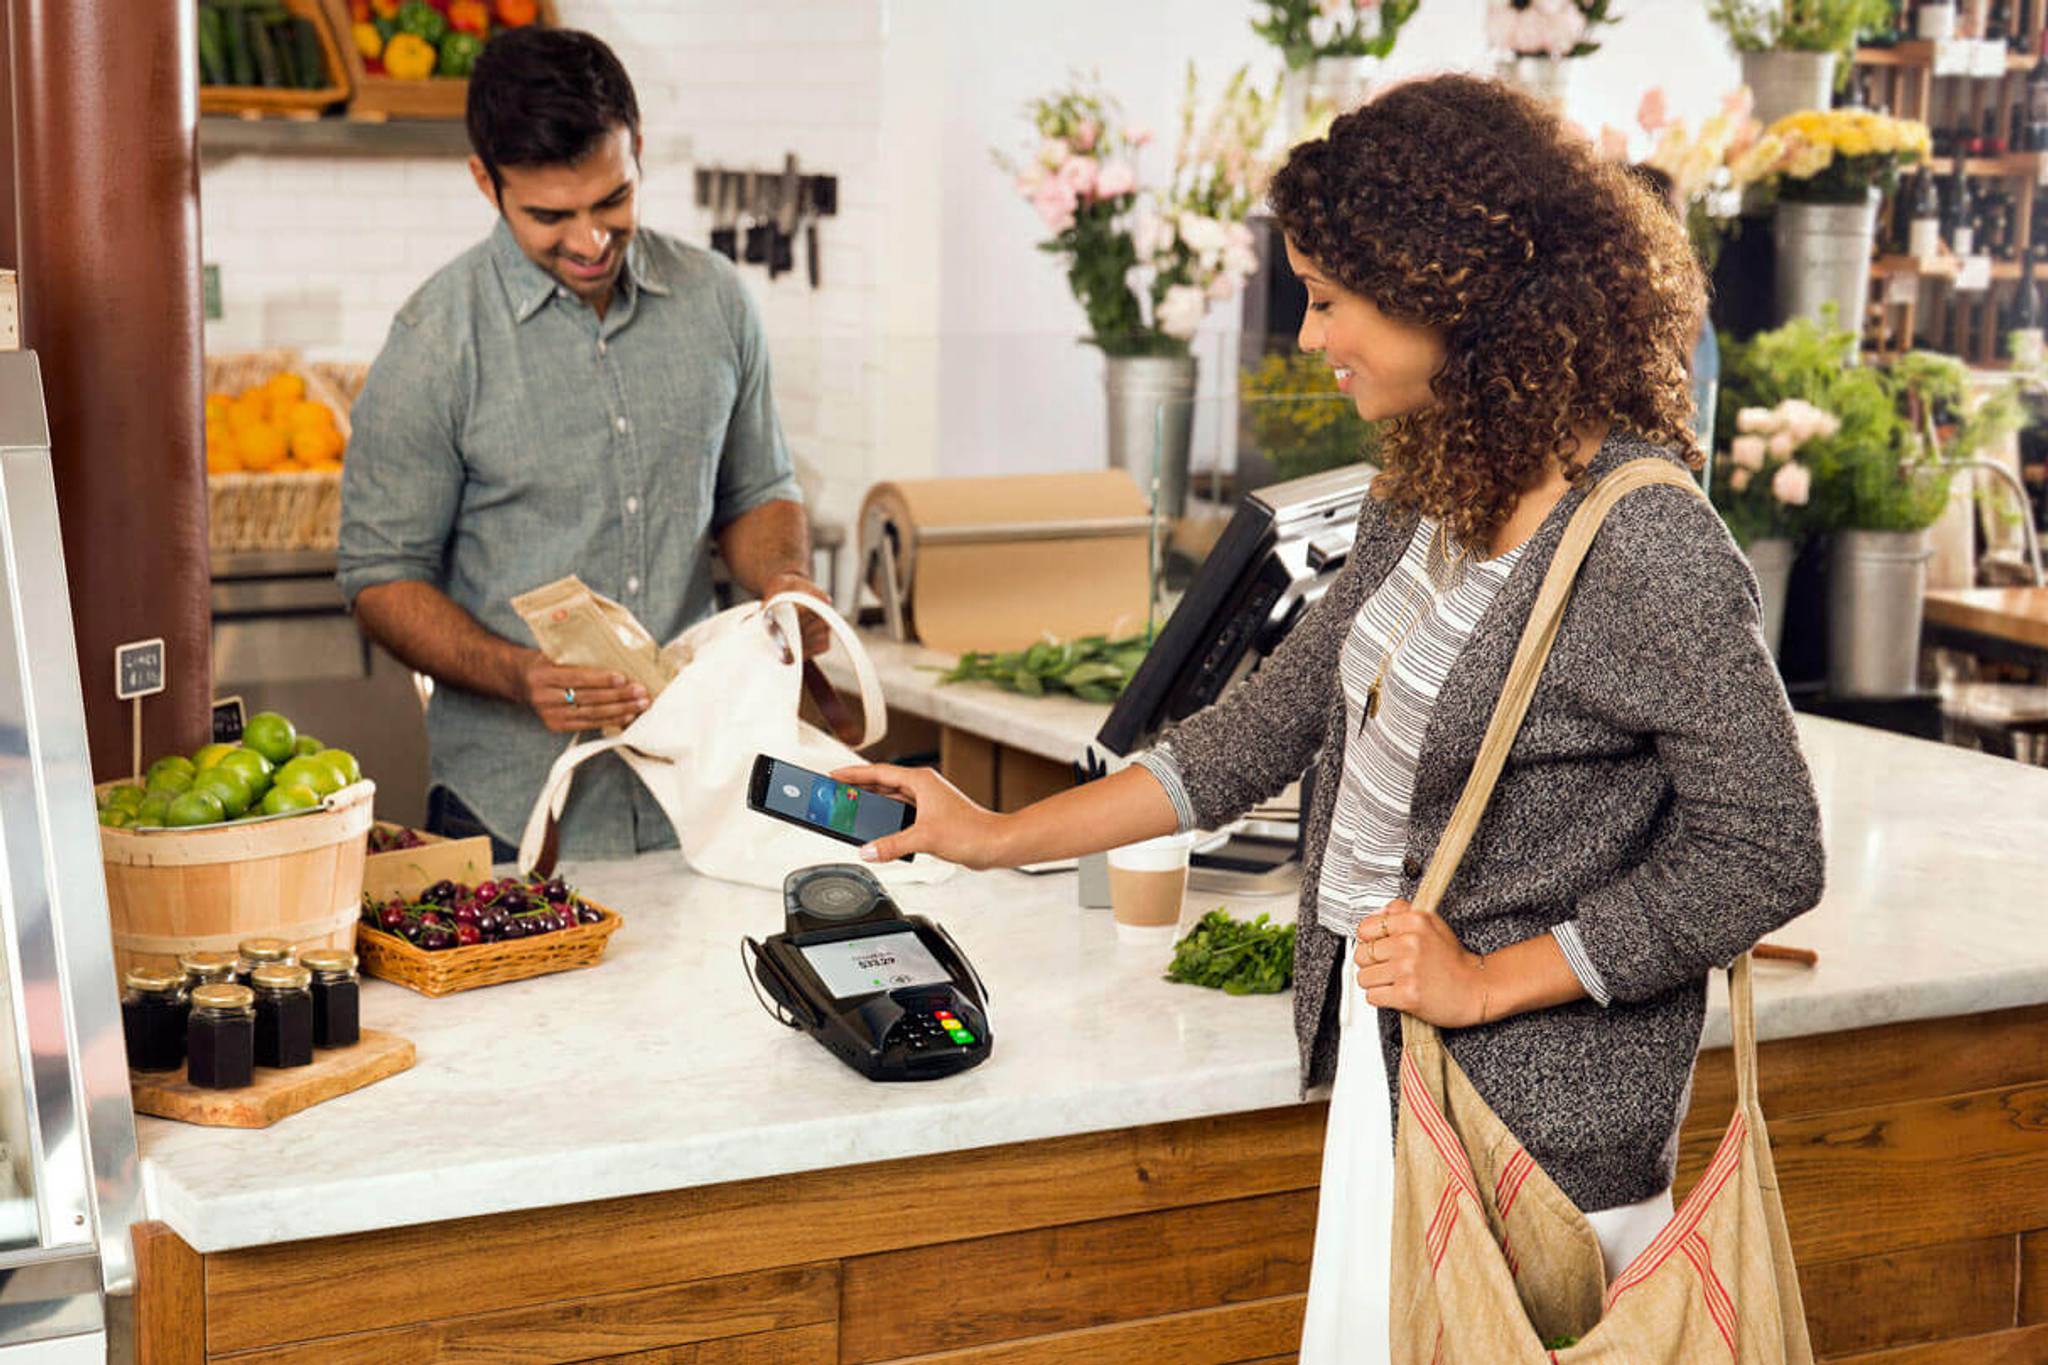 Mobile payments are coming to Android users